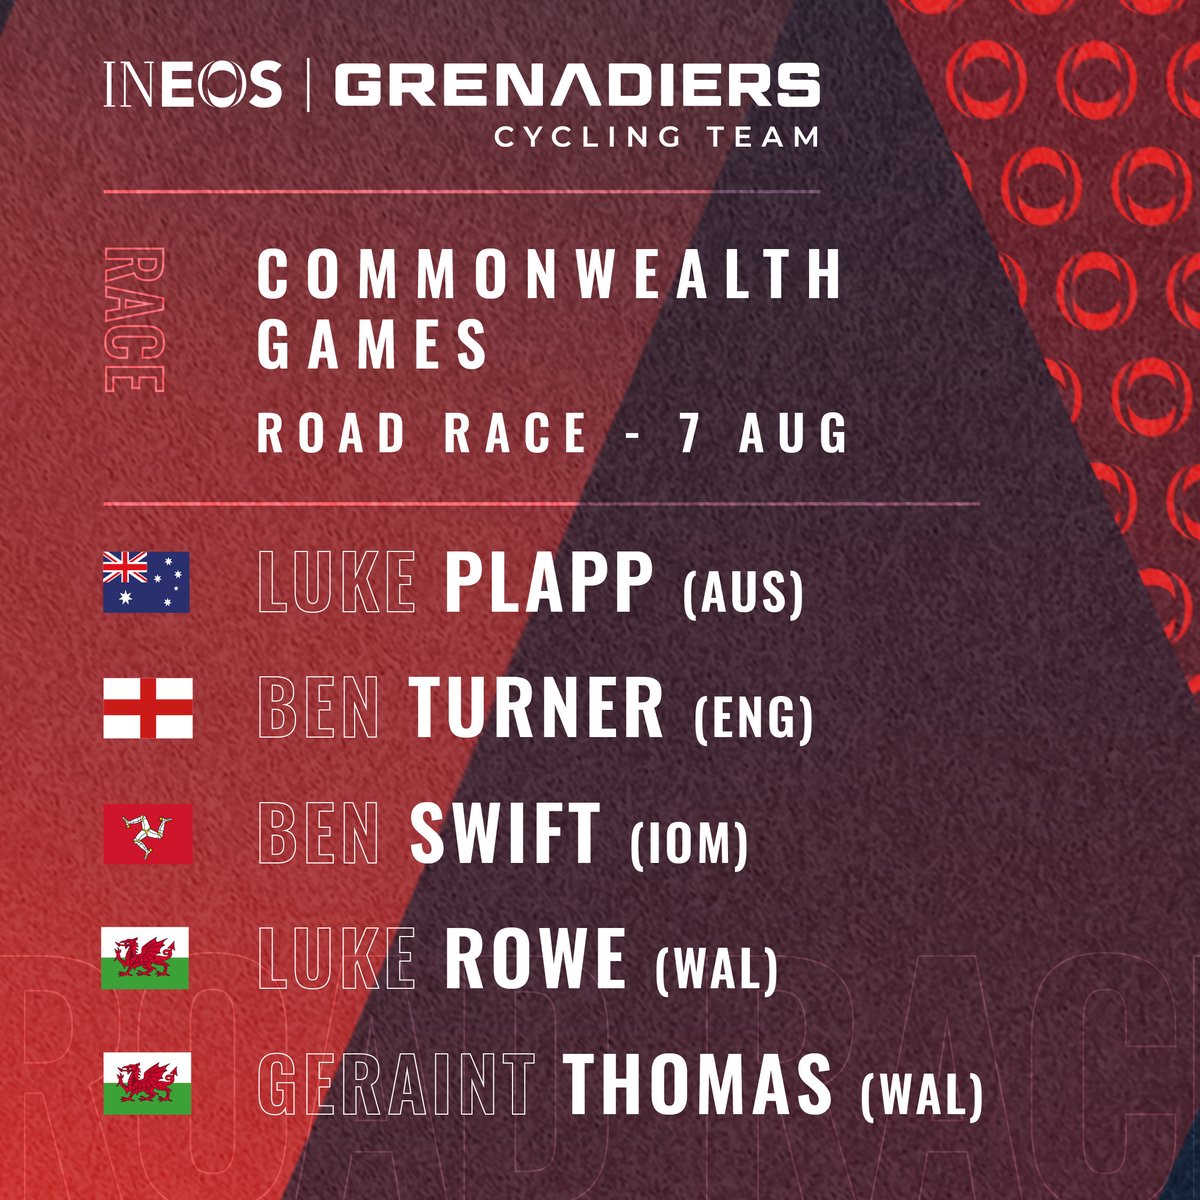 We're looking forward to watching the boys in #CommonwealthGames road race action tomorrow. It all kicks off at 12:30pm BST with 🥇🥈🥉 on the line.